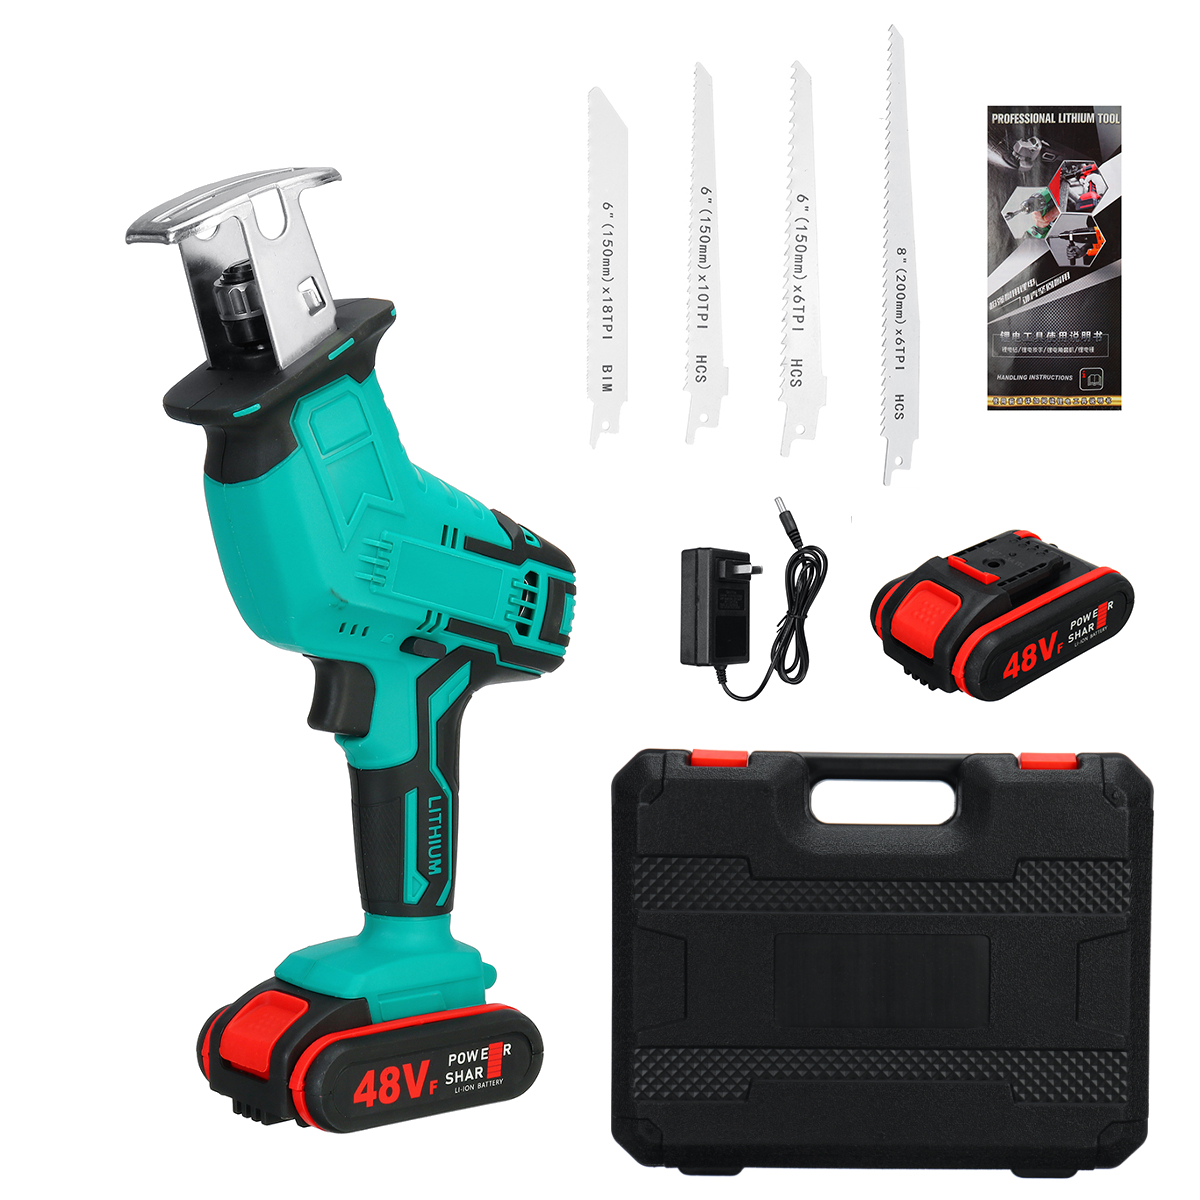 Electric-Cordless-Reciprocating-Saw-4-Blades-Battery-Charger-Saw-Power-Tool-1732002-2